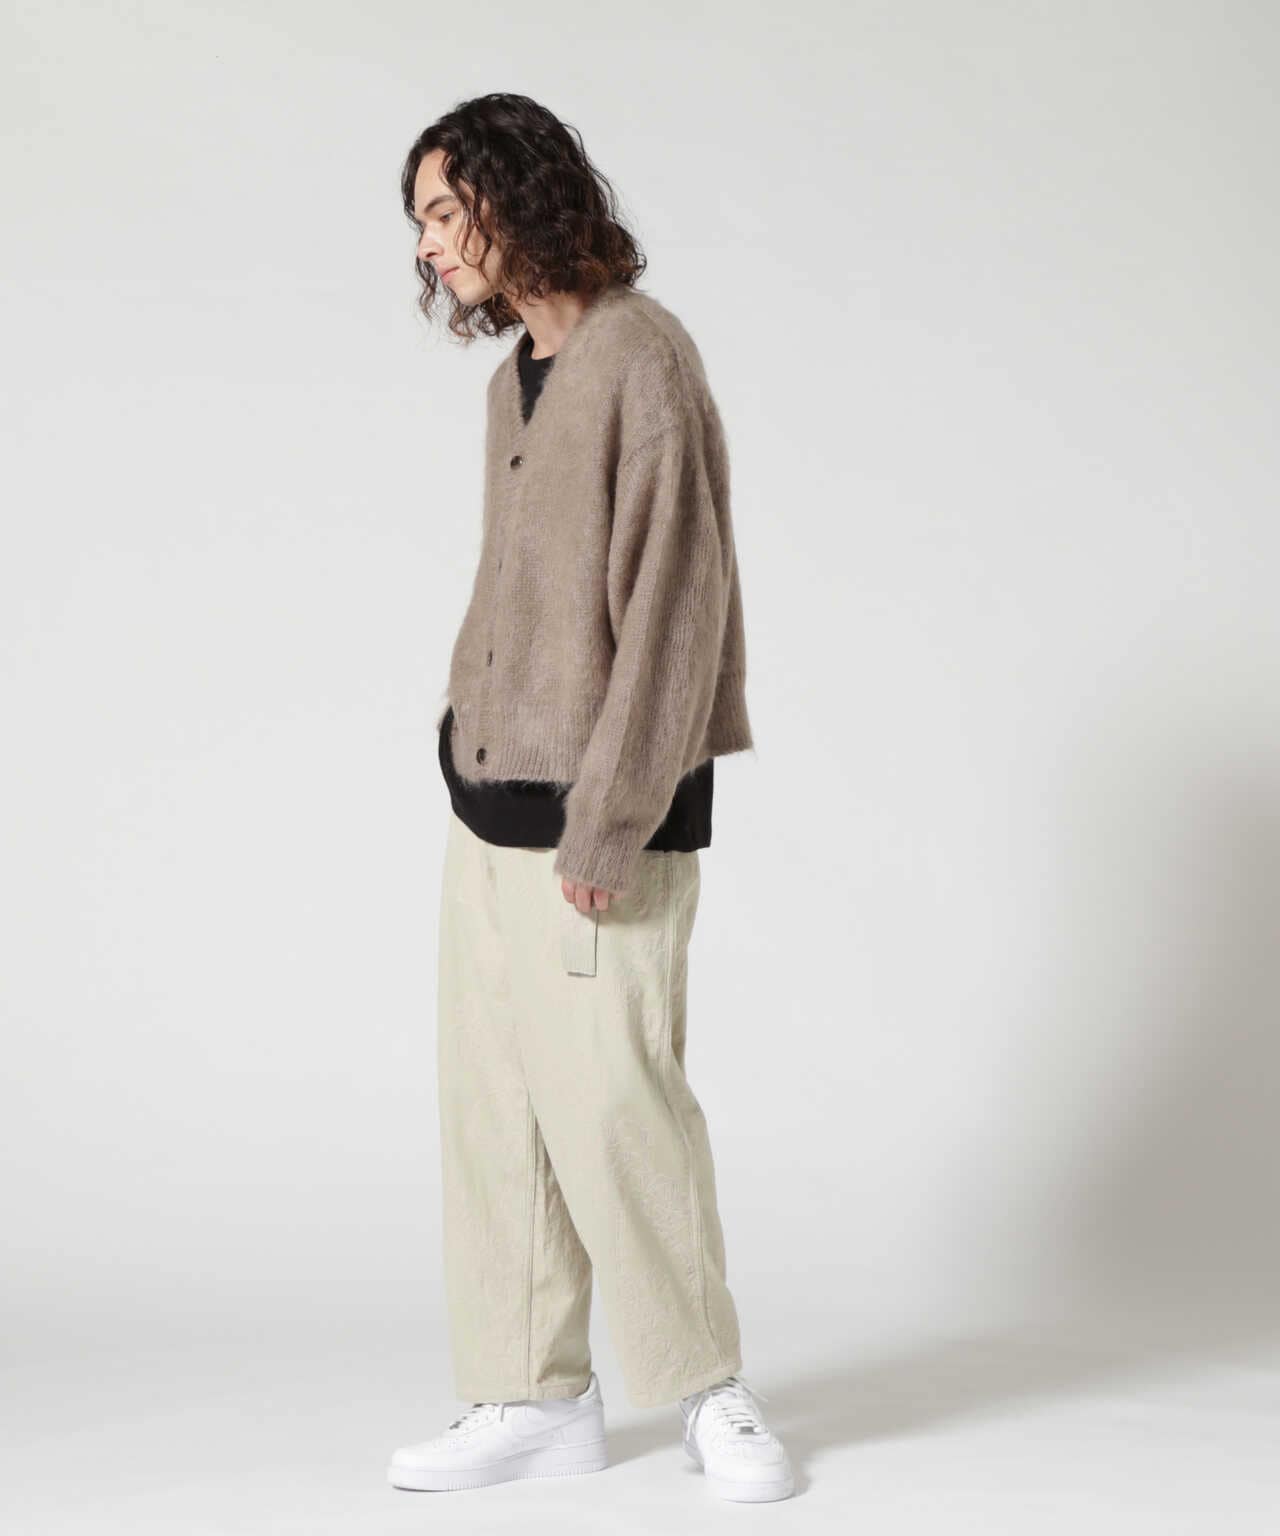 Espresso Twisted Belted Pants in Garment Dyed Denim